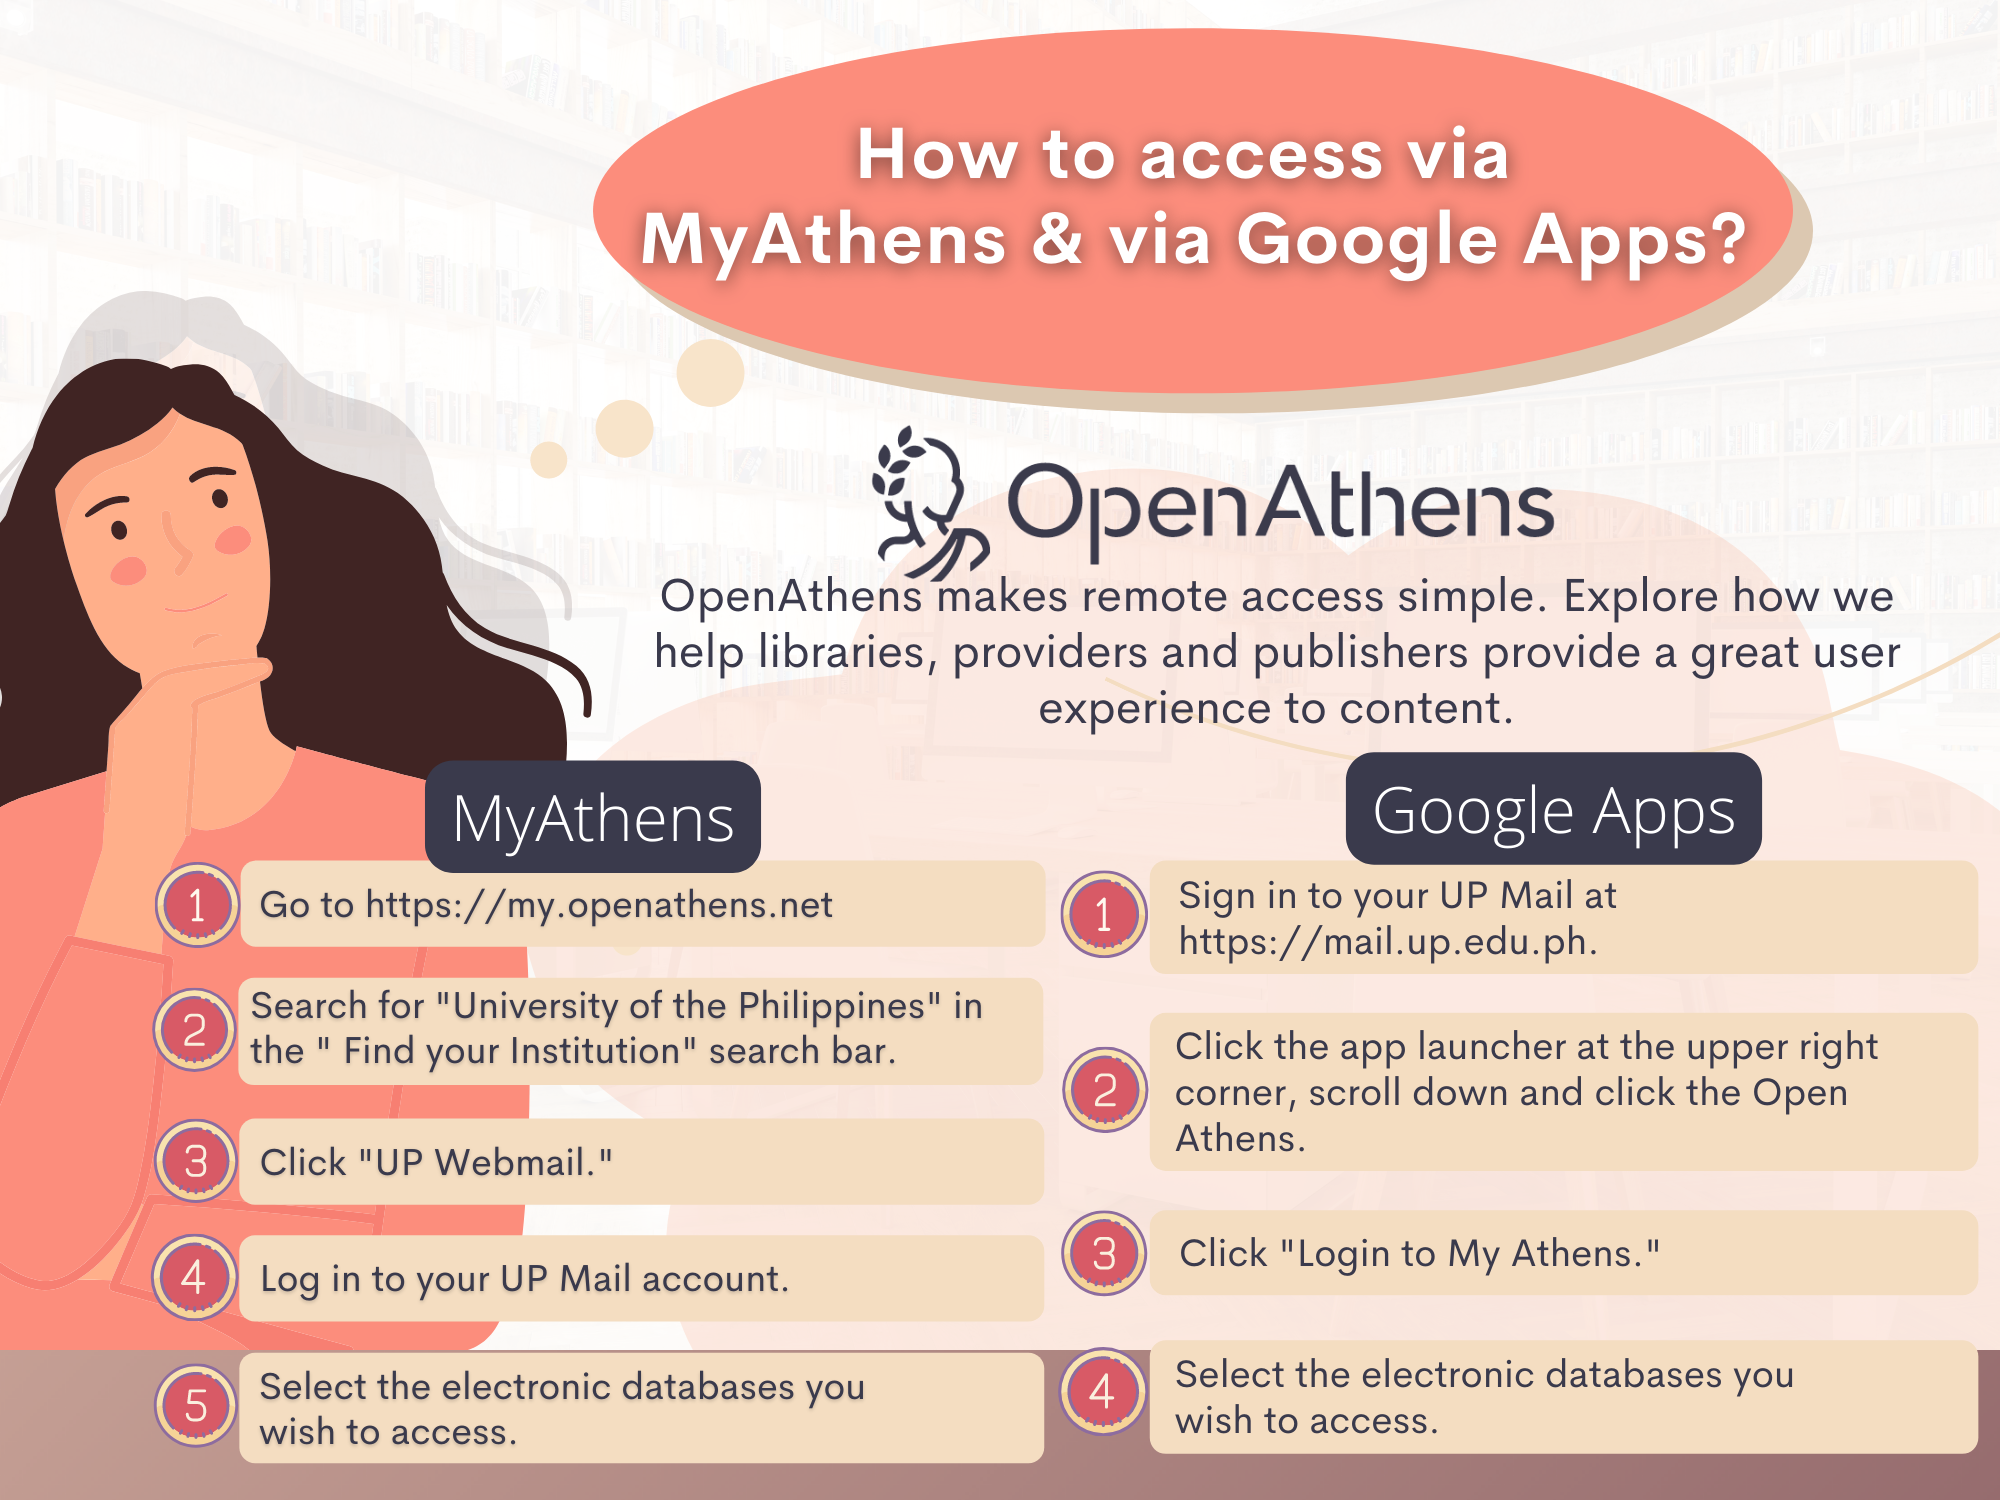 Ways on How to Access Open Athens